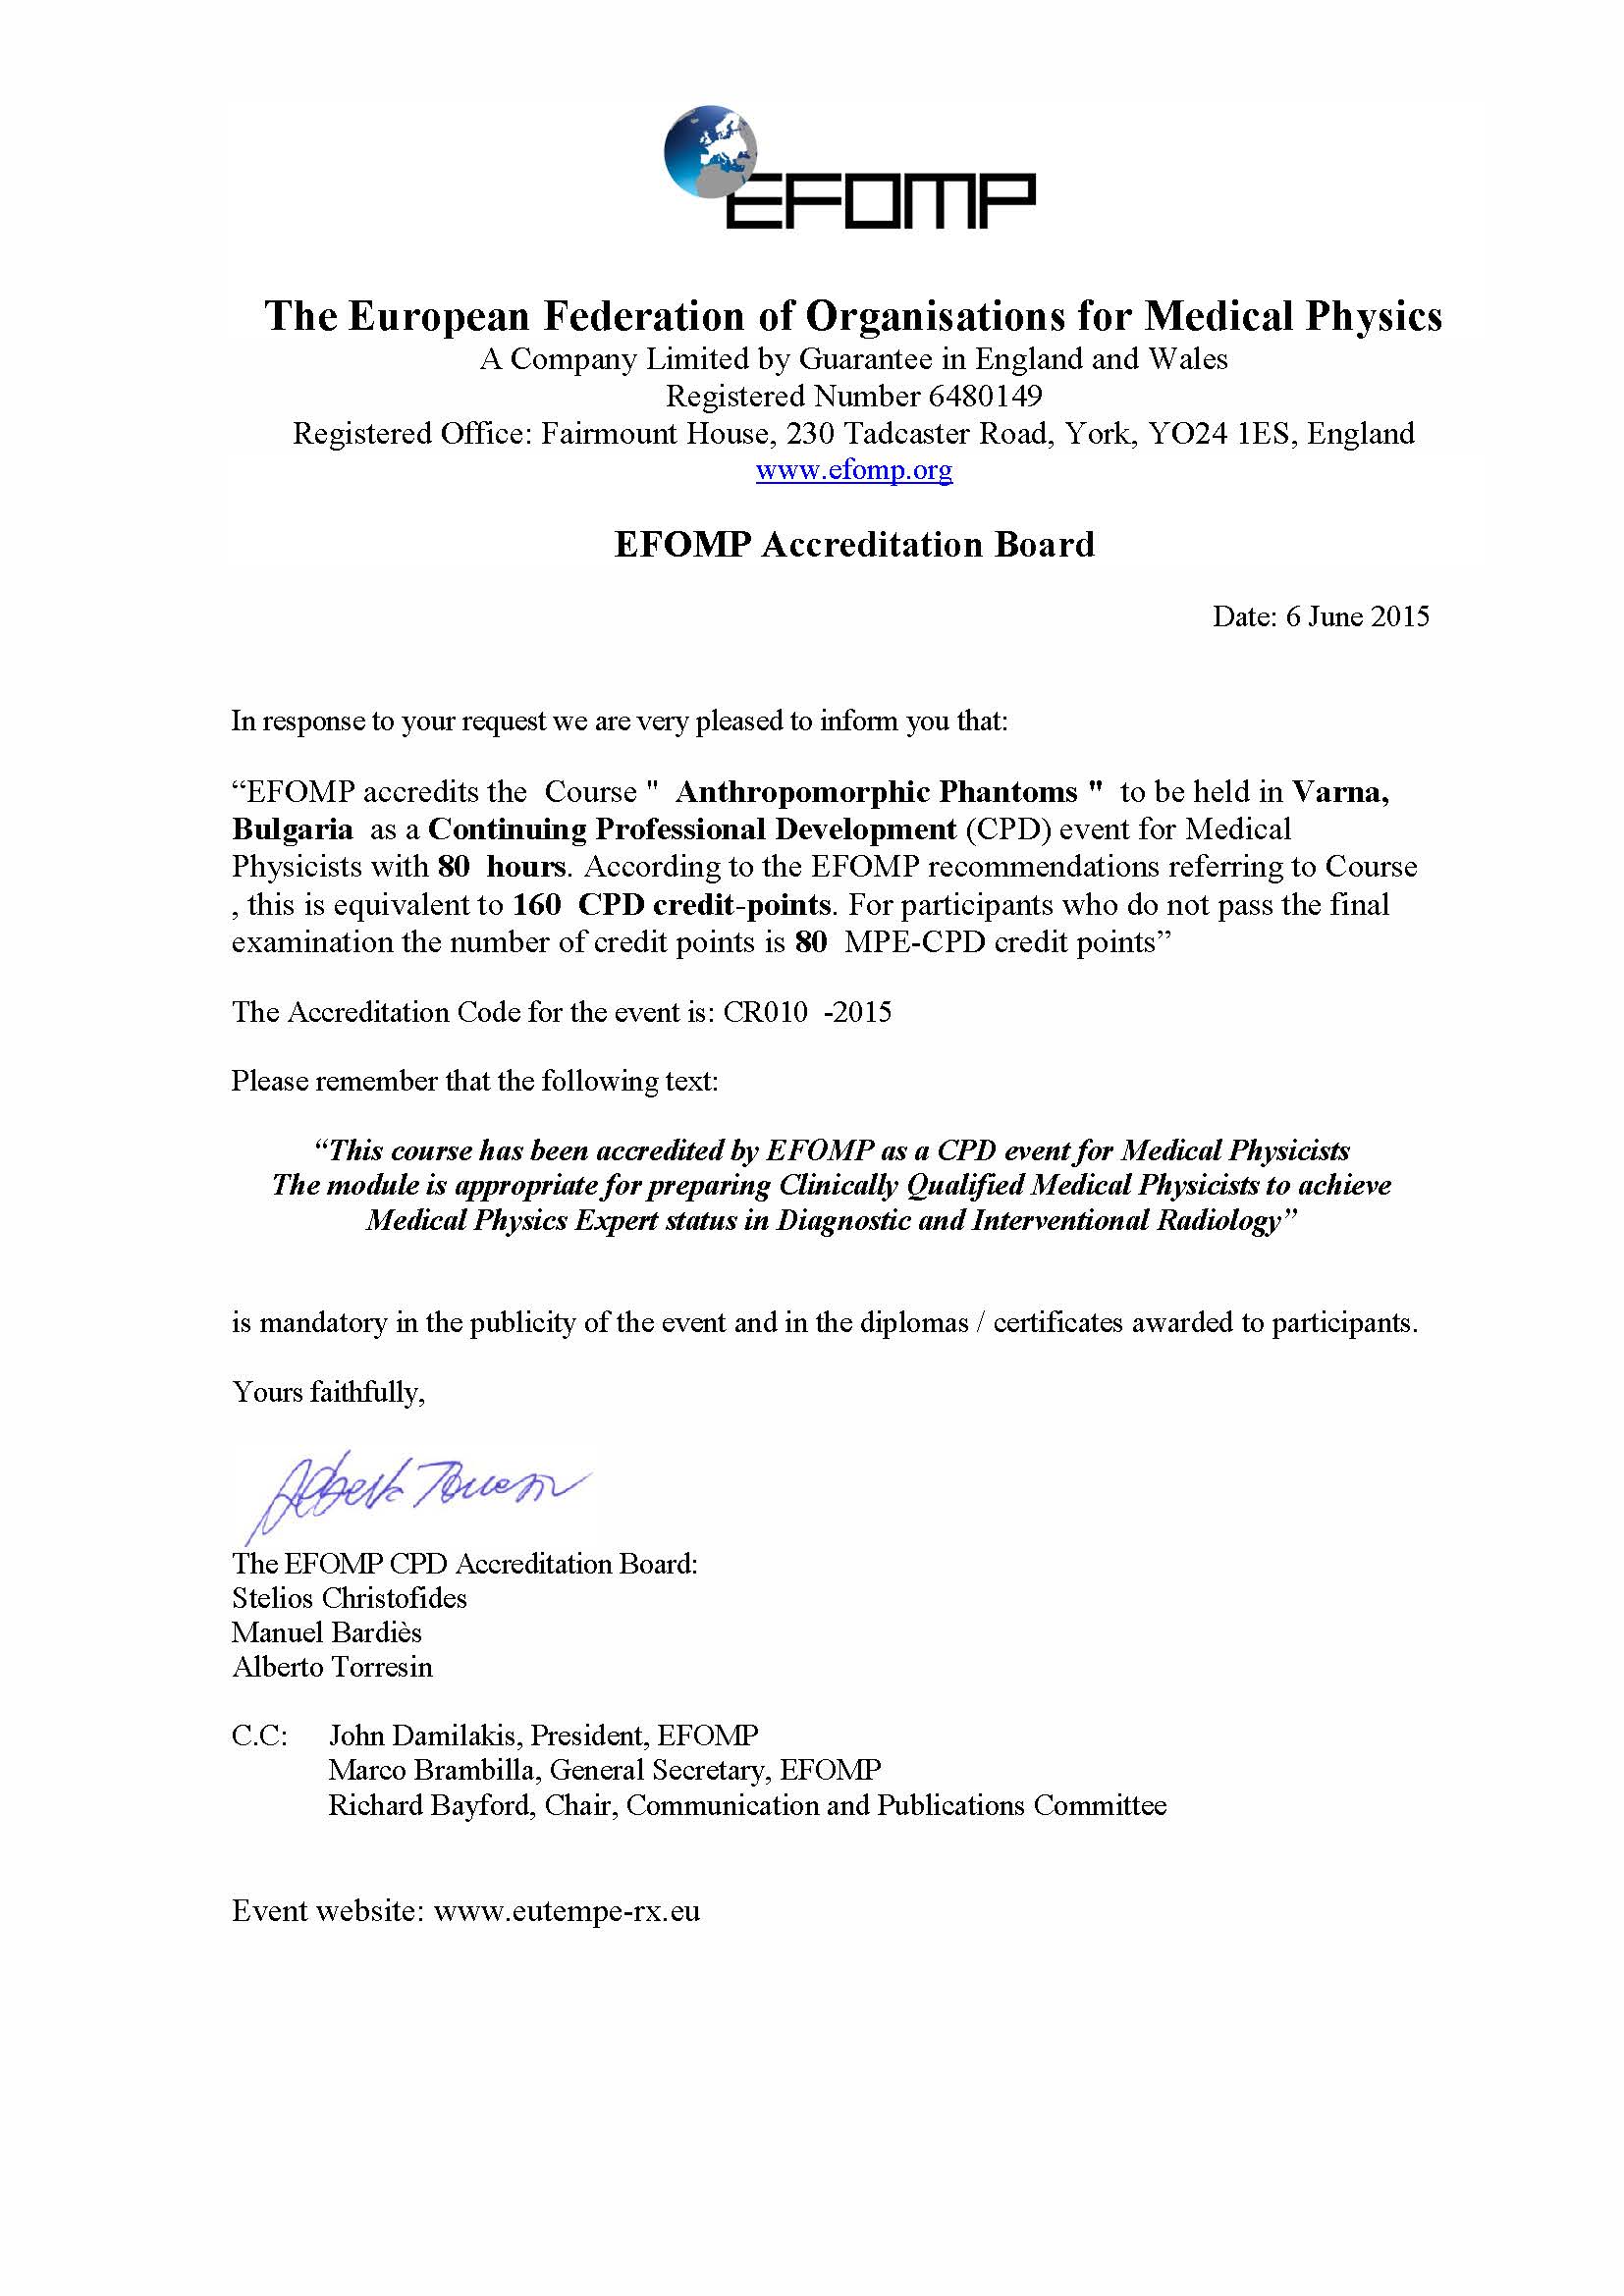 CR010-2015-EFOMP Certificate of Accreditation